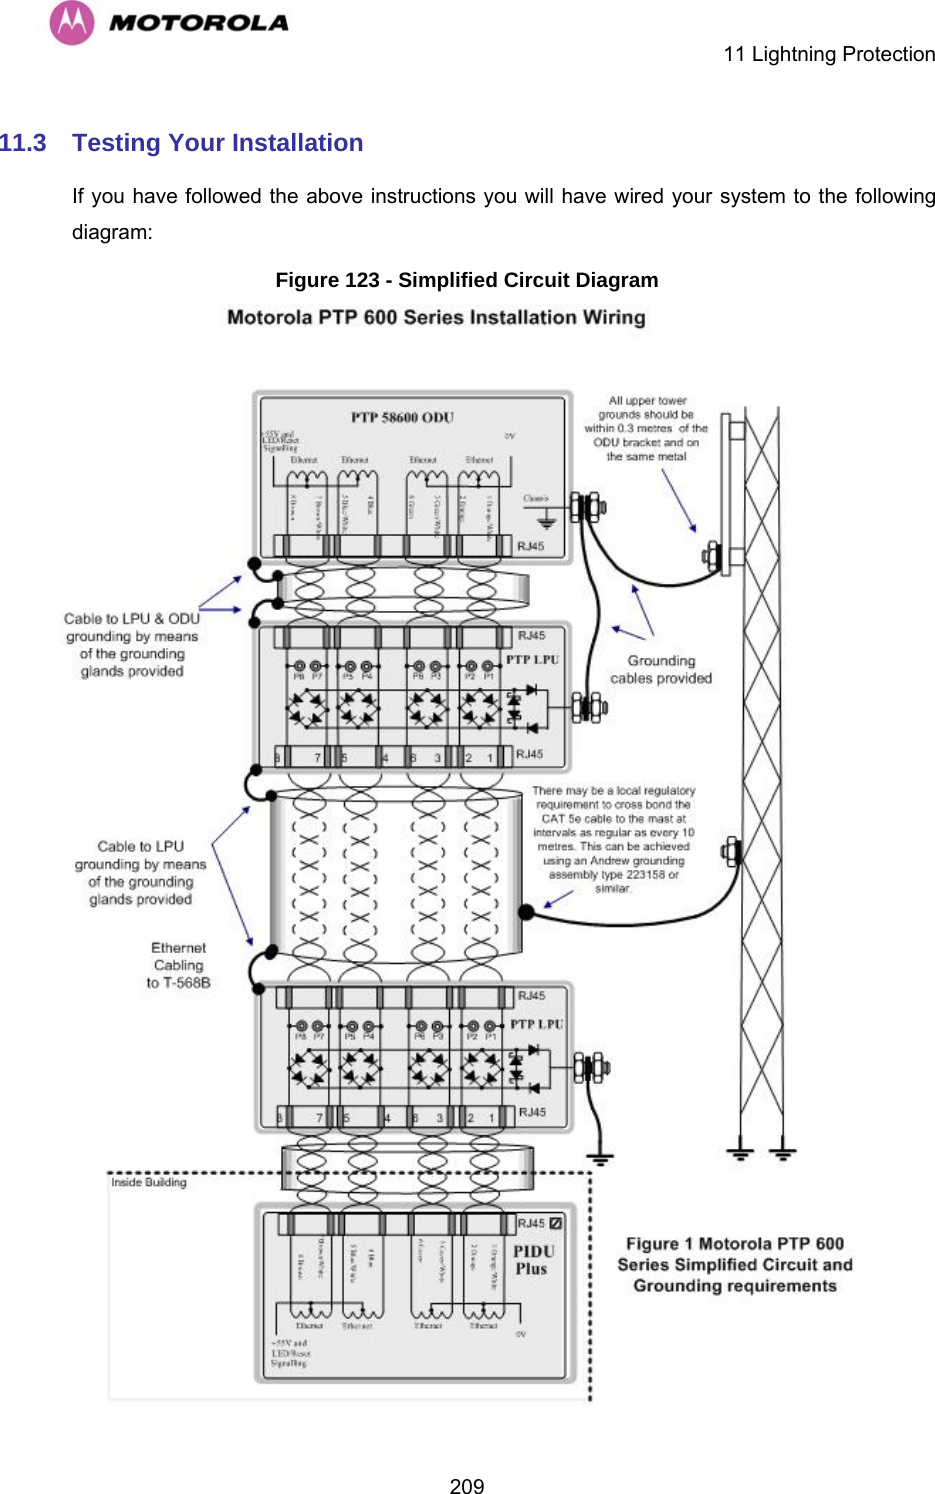    11 Lightning Protection  20911.3  Testing Your Installation If you have followed the above instructions you will have wired your system to the following diagram: Figure 123 - Simplified Circuit Diagram  